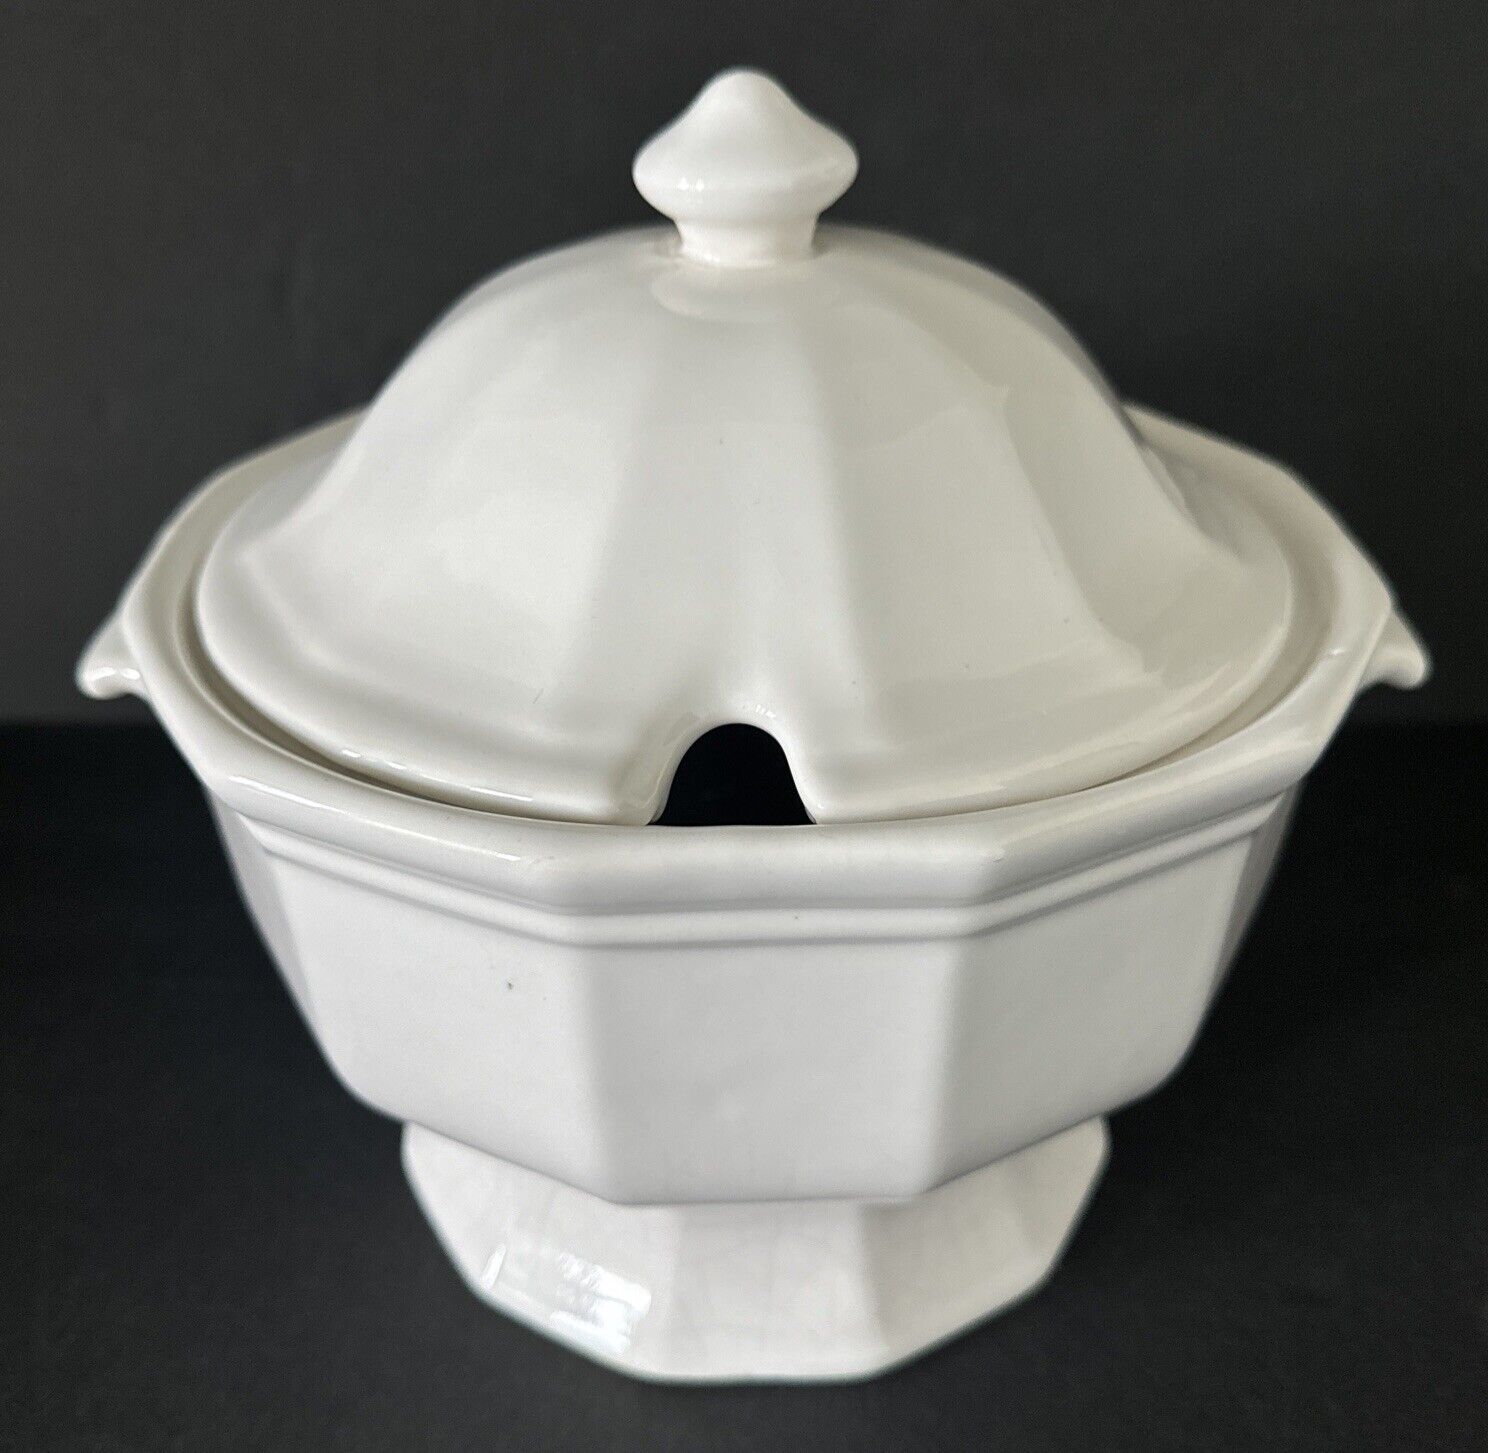 Pfaltzgraff Stoneware Footed White Heritage Soup Tureen w Lid 150H No Ladle